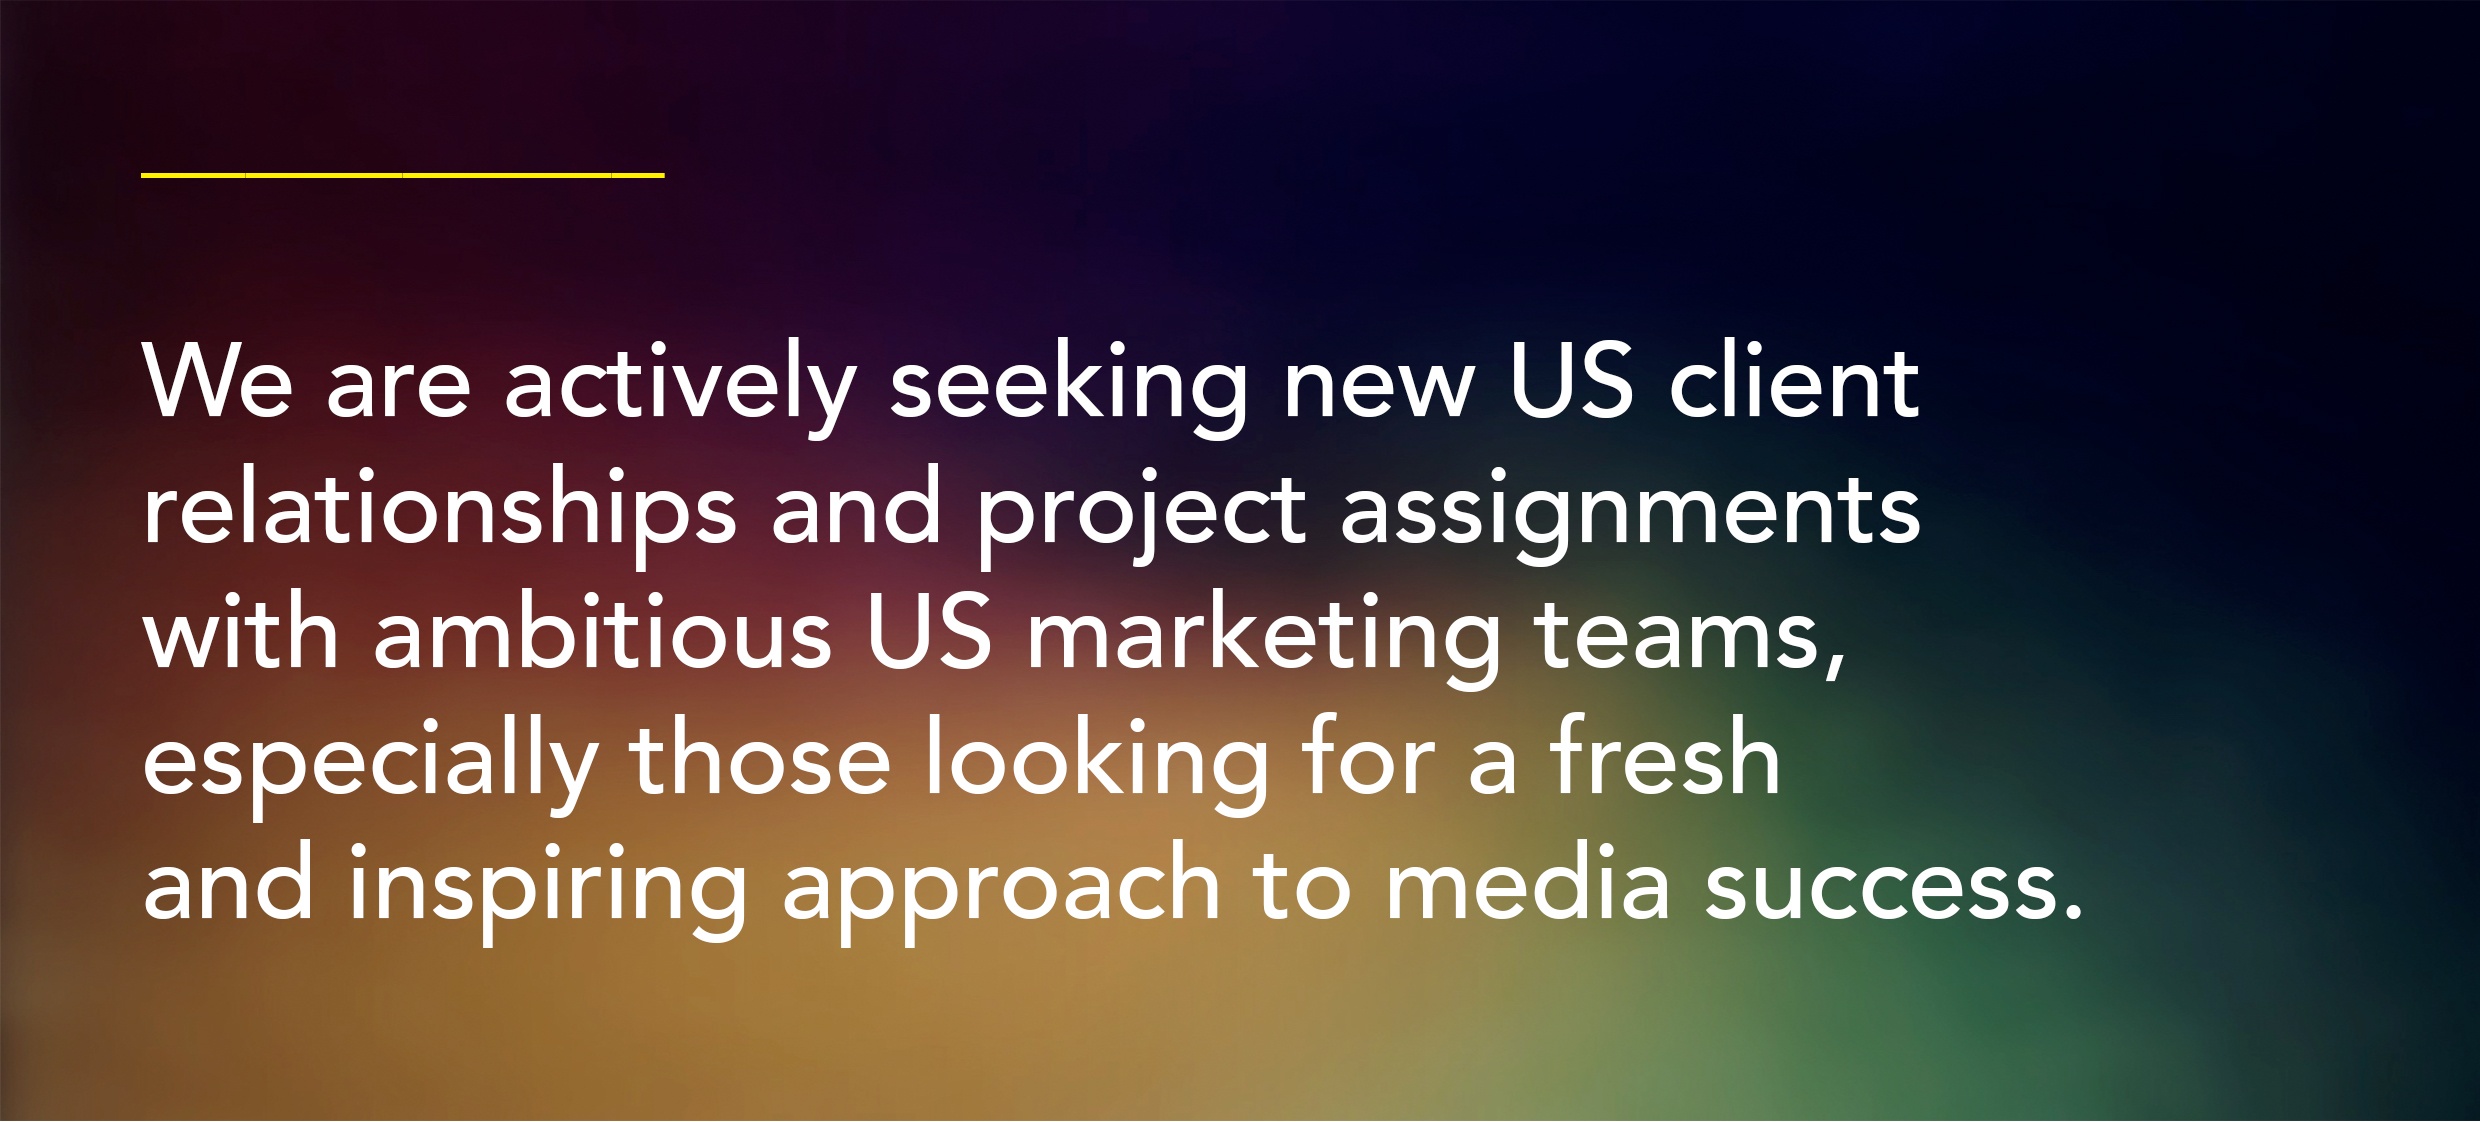 Call outWe are actively seeking new US client relationships and project assignments with ambitious US marketing teams, especially those looking for a fresh and inspiring approach to media success. 